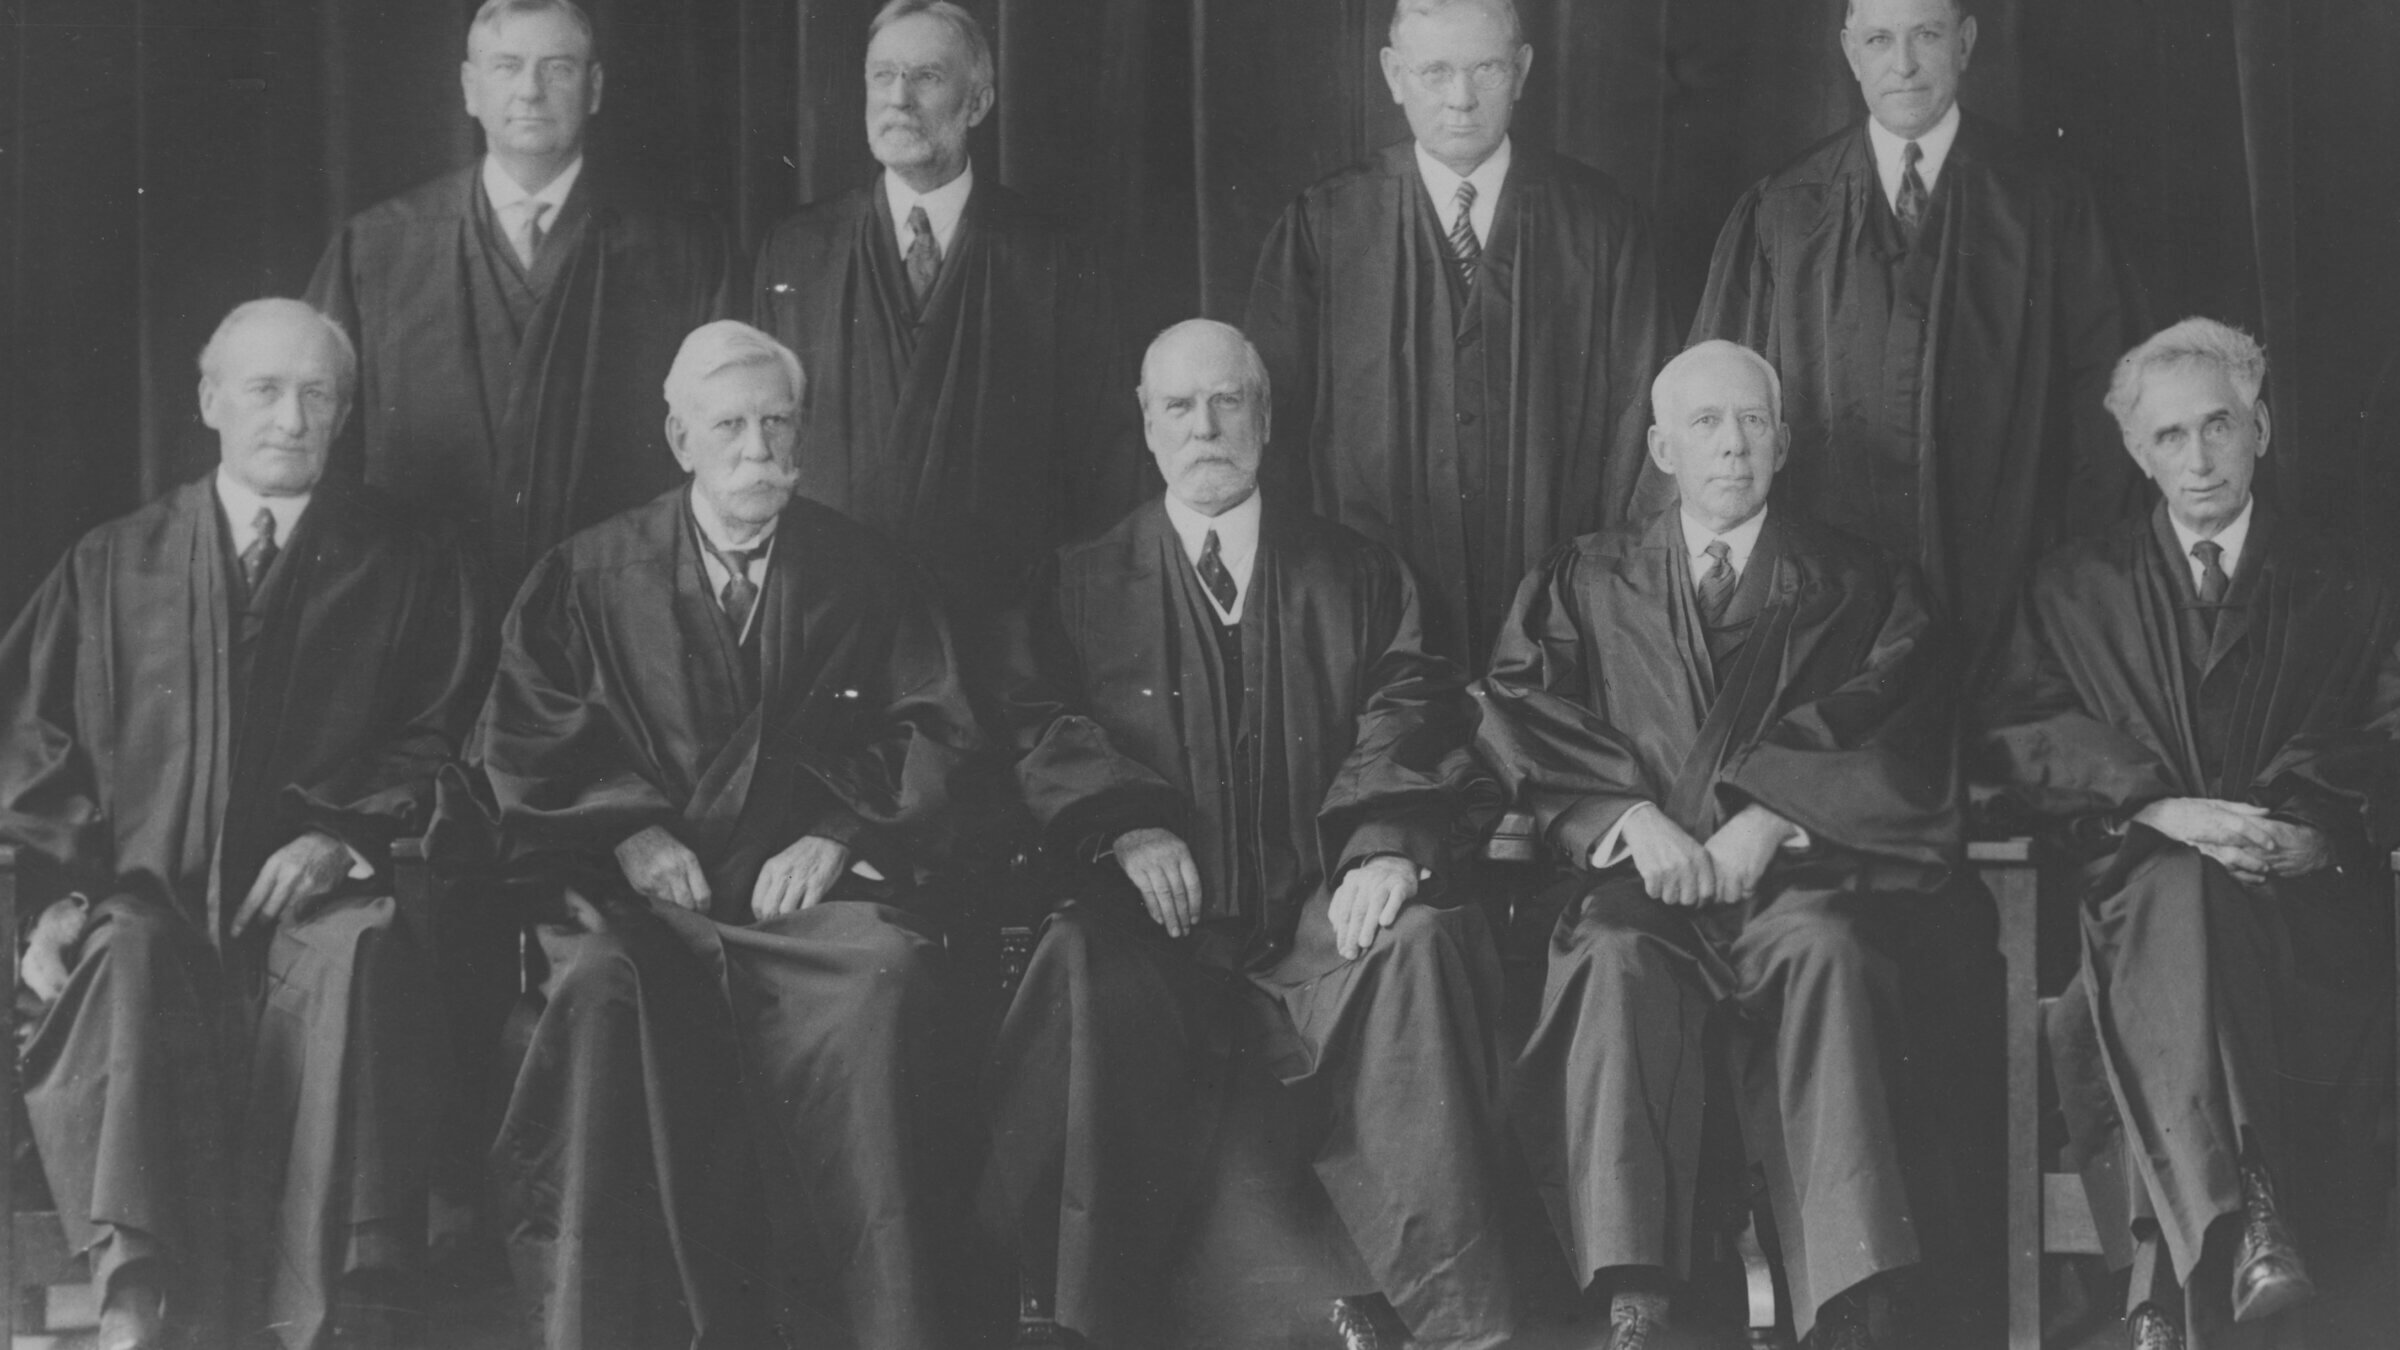 Louis Brandeis was the first Jewish justice on the the U.S. Supreme Court. In this 1930 photo, he is seated in the bottom row on the far right. Also pictured, standing left to right: Justice Harlan F. Stone, Justice George Sutherland, Justice Pierce Butler, Justice Owen Roberts; seated, left to right, Justice James Clark McReynolds, Justice Oliver Wendell Holmes Jr., Chief Justice Charles Evans Hughes, Justice Willis Van Devanter, and Brandeis. 